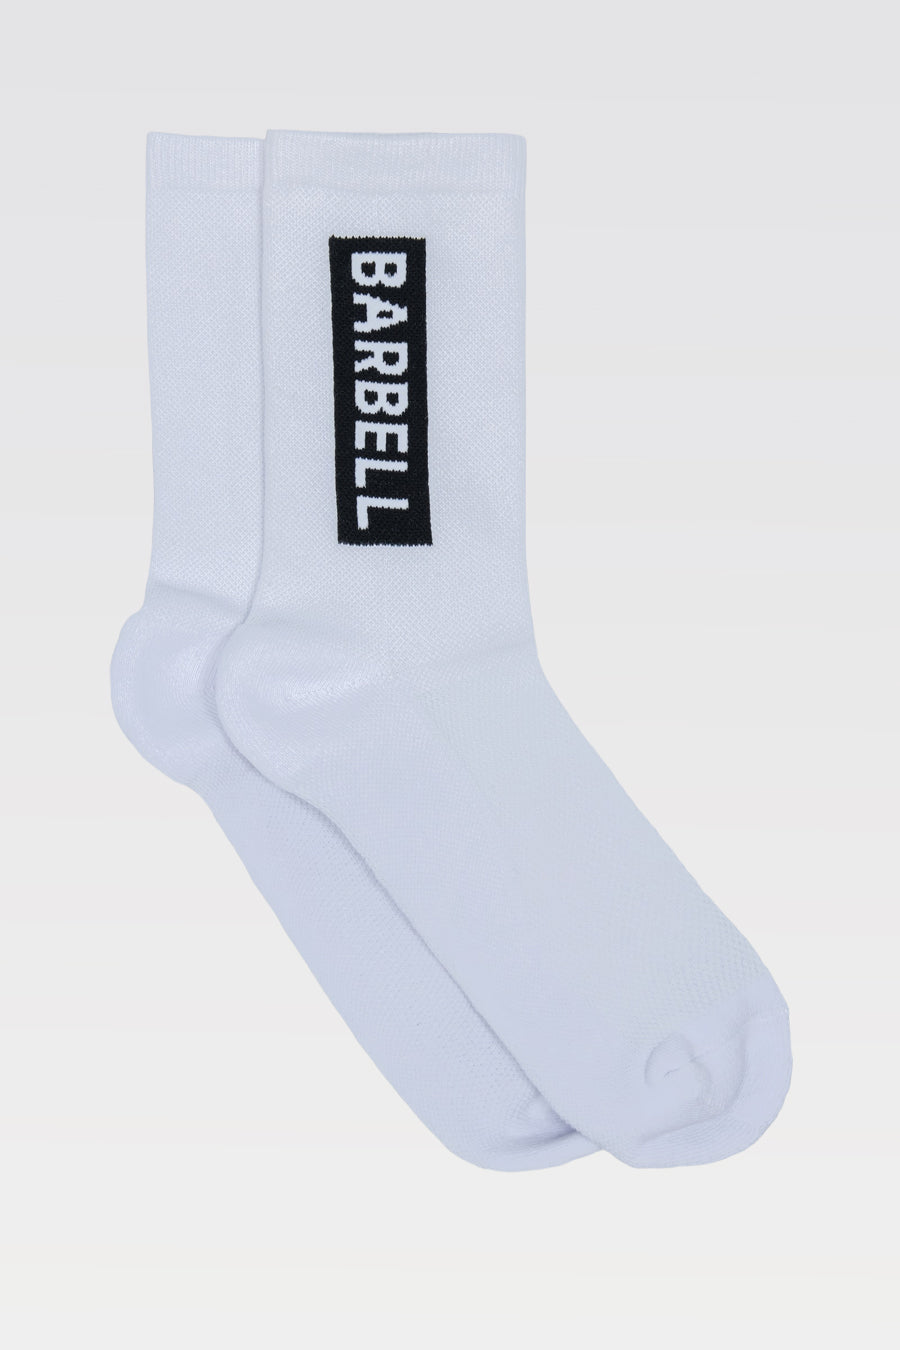 why we made the Crucial Crew Sock